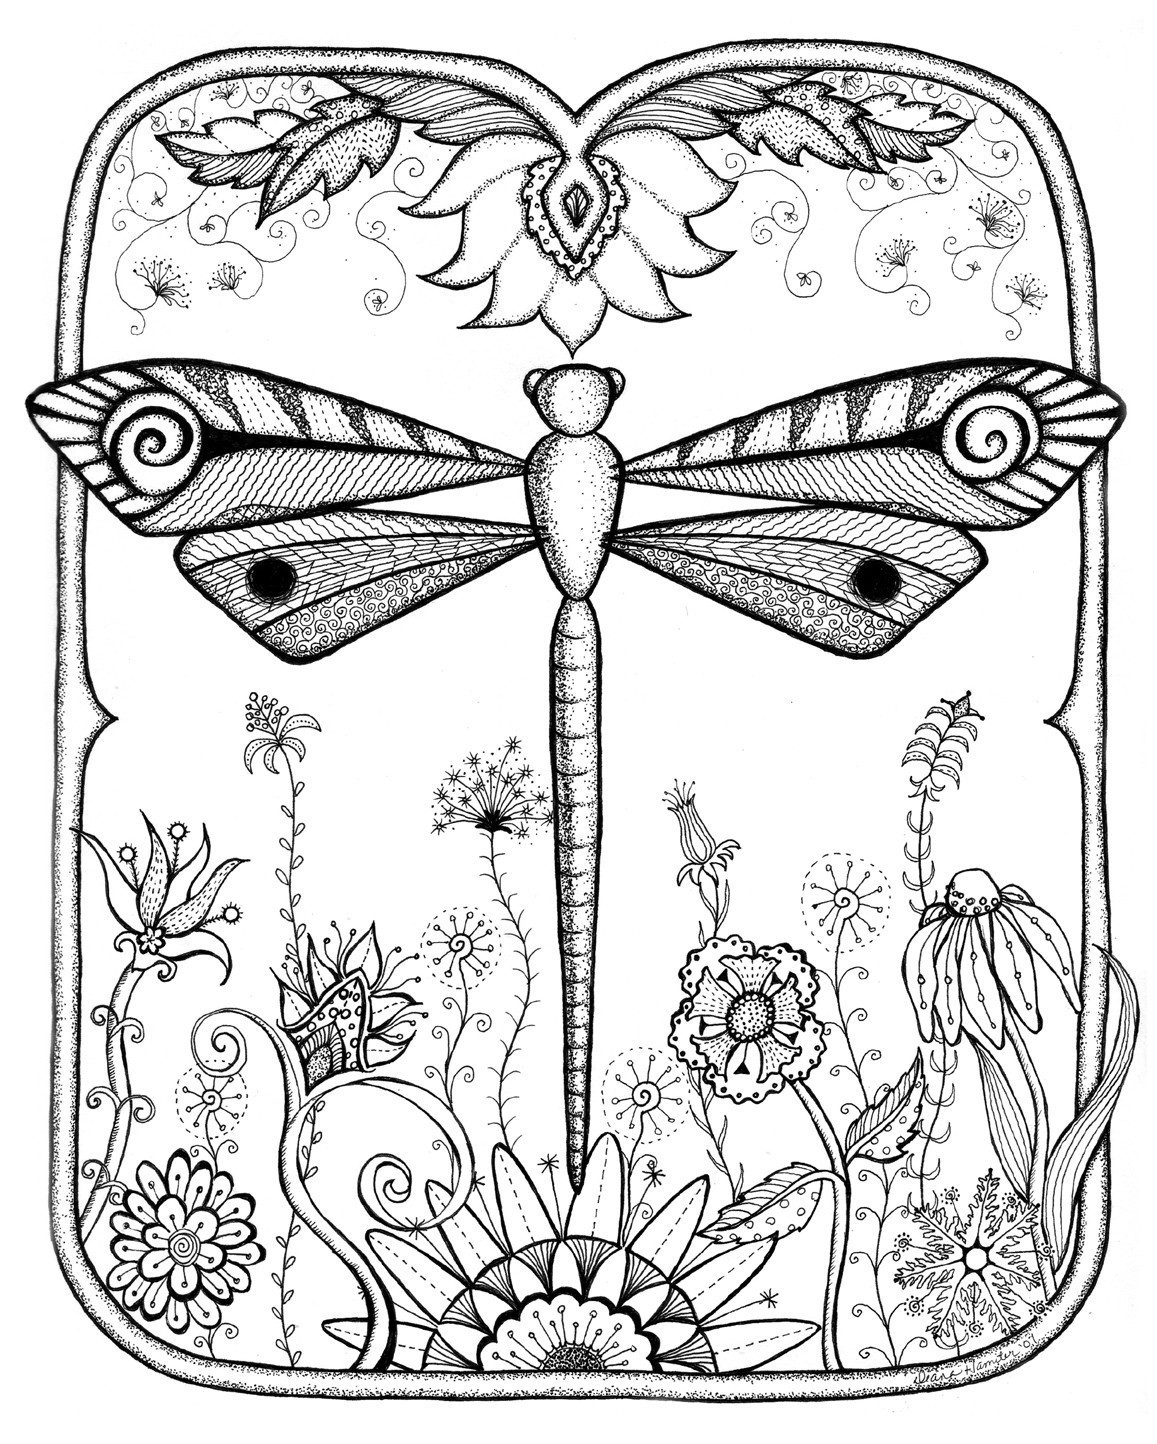 dragonfly-coloring-pages-for-adults-at-getcolorings-free